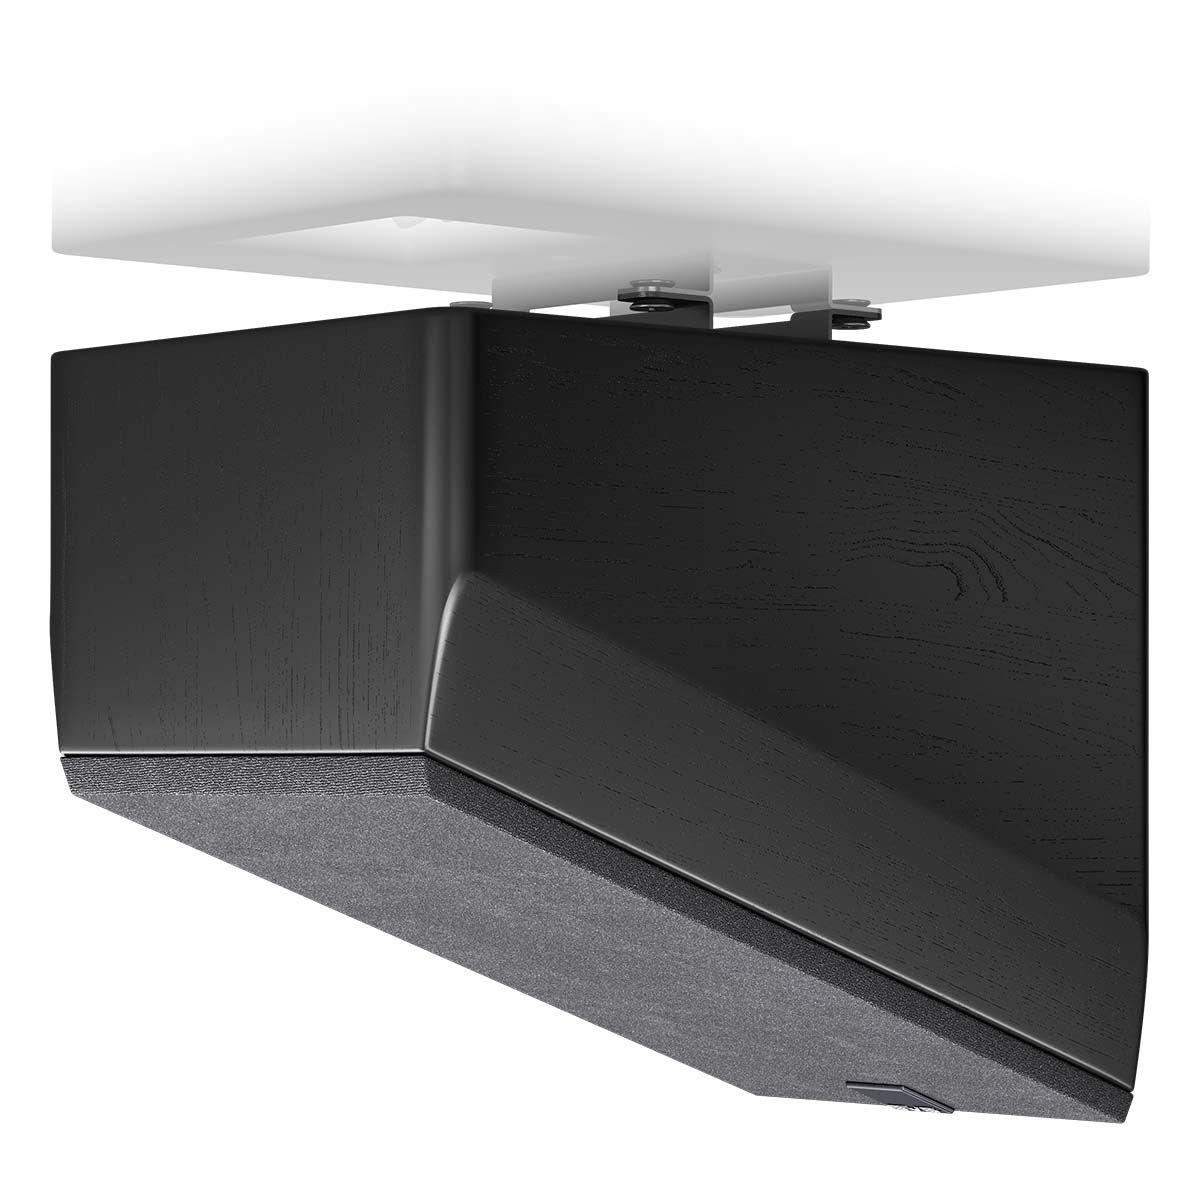 SVS Ultra Elevation Surround Speaker - single black oak with grille - mounted ceiling view